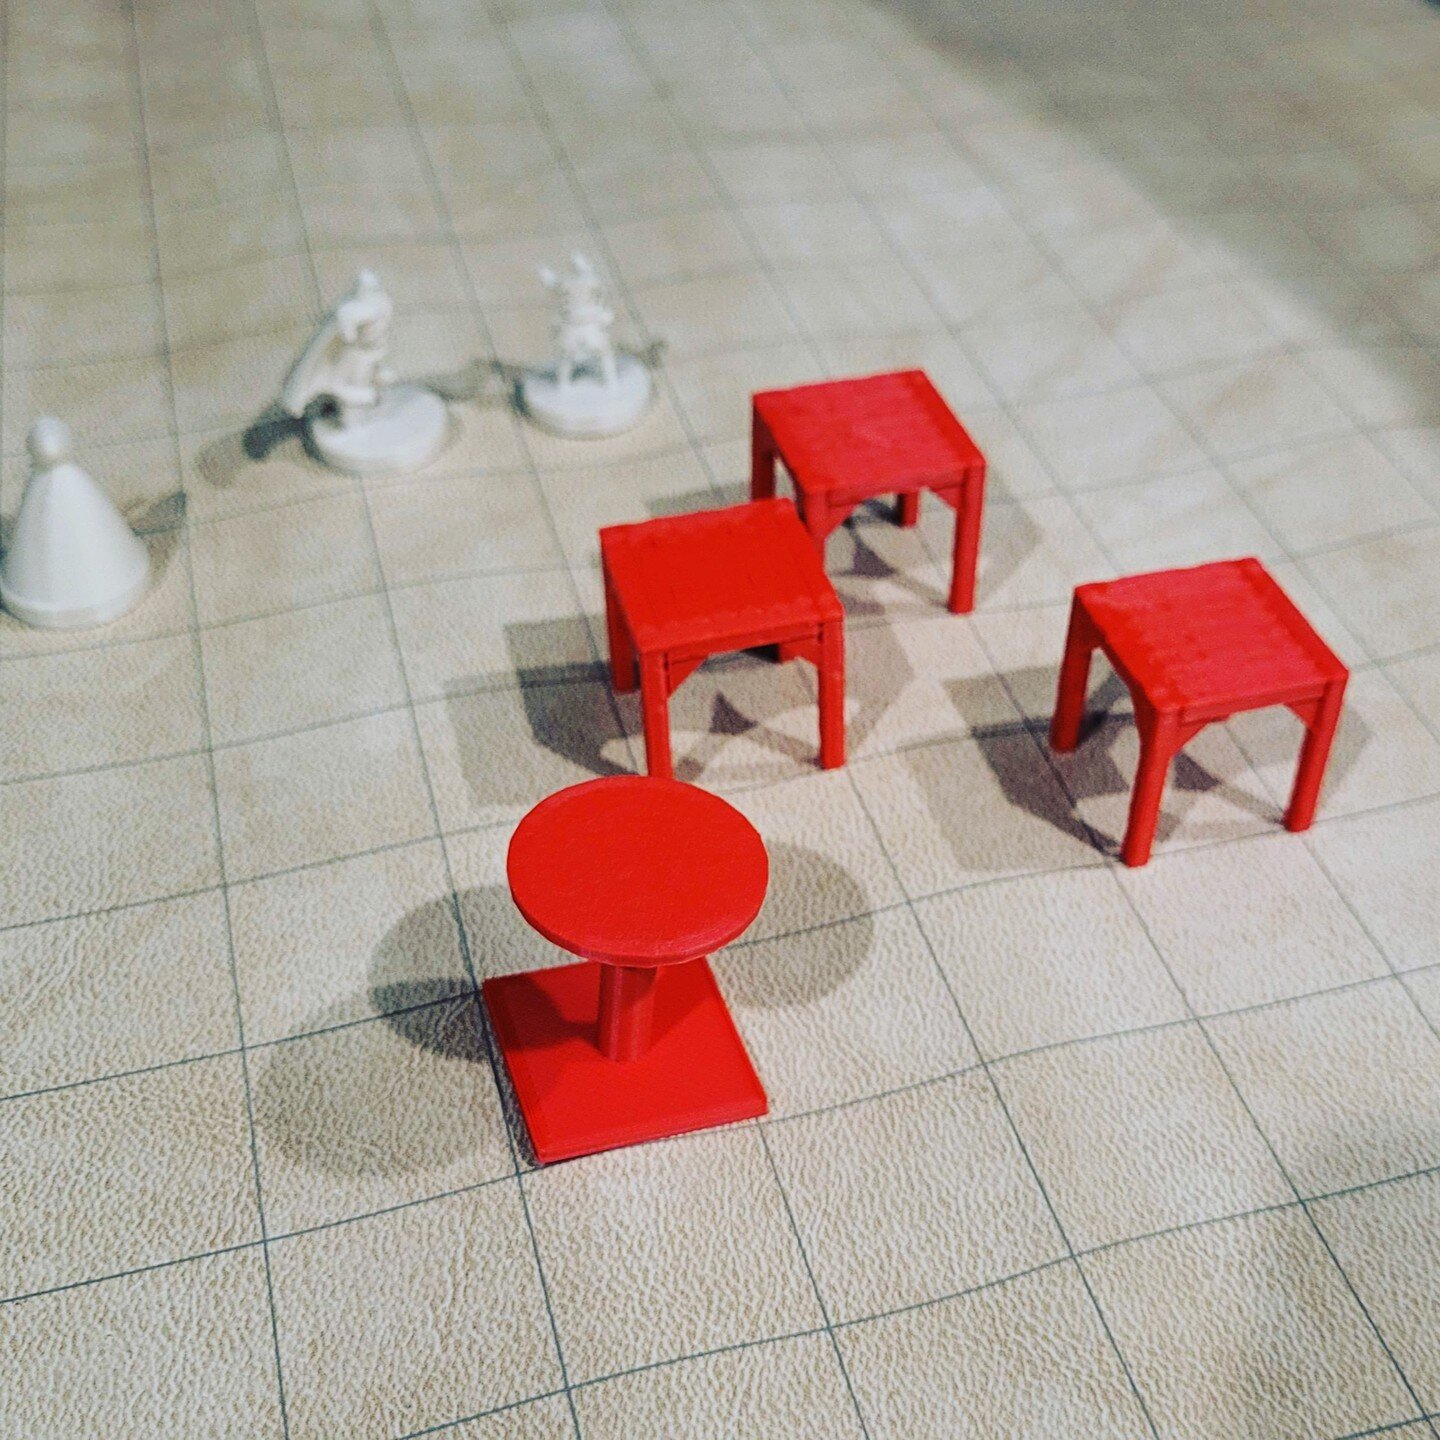 #dnd #3dprinting some new custom board pieces!